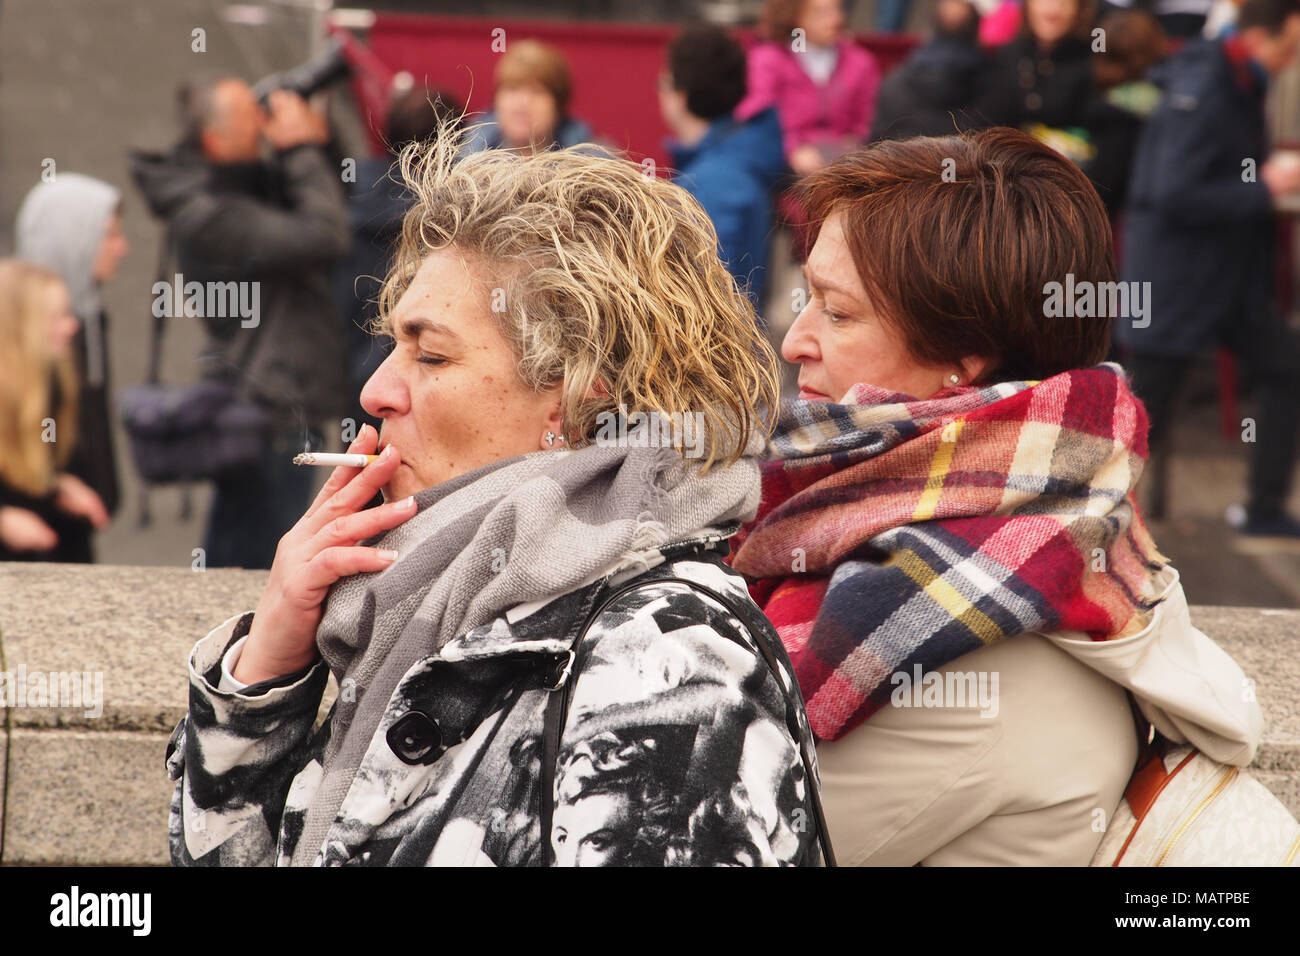 Two women smoking cigarettes sightseeing in London on a cold winter day Stock Photo